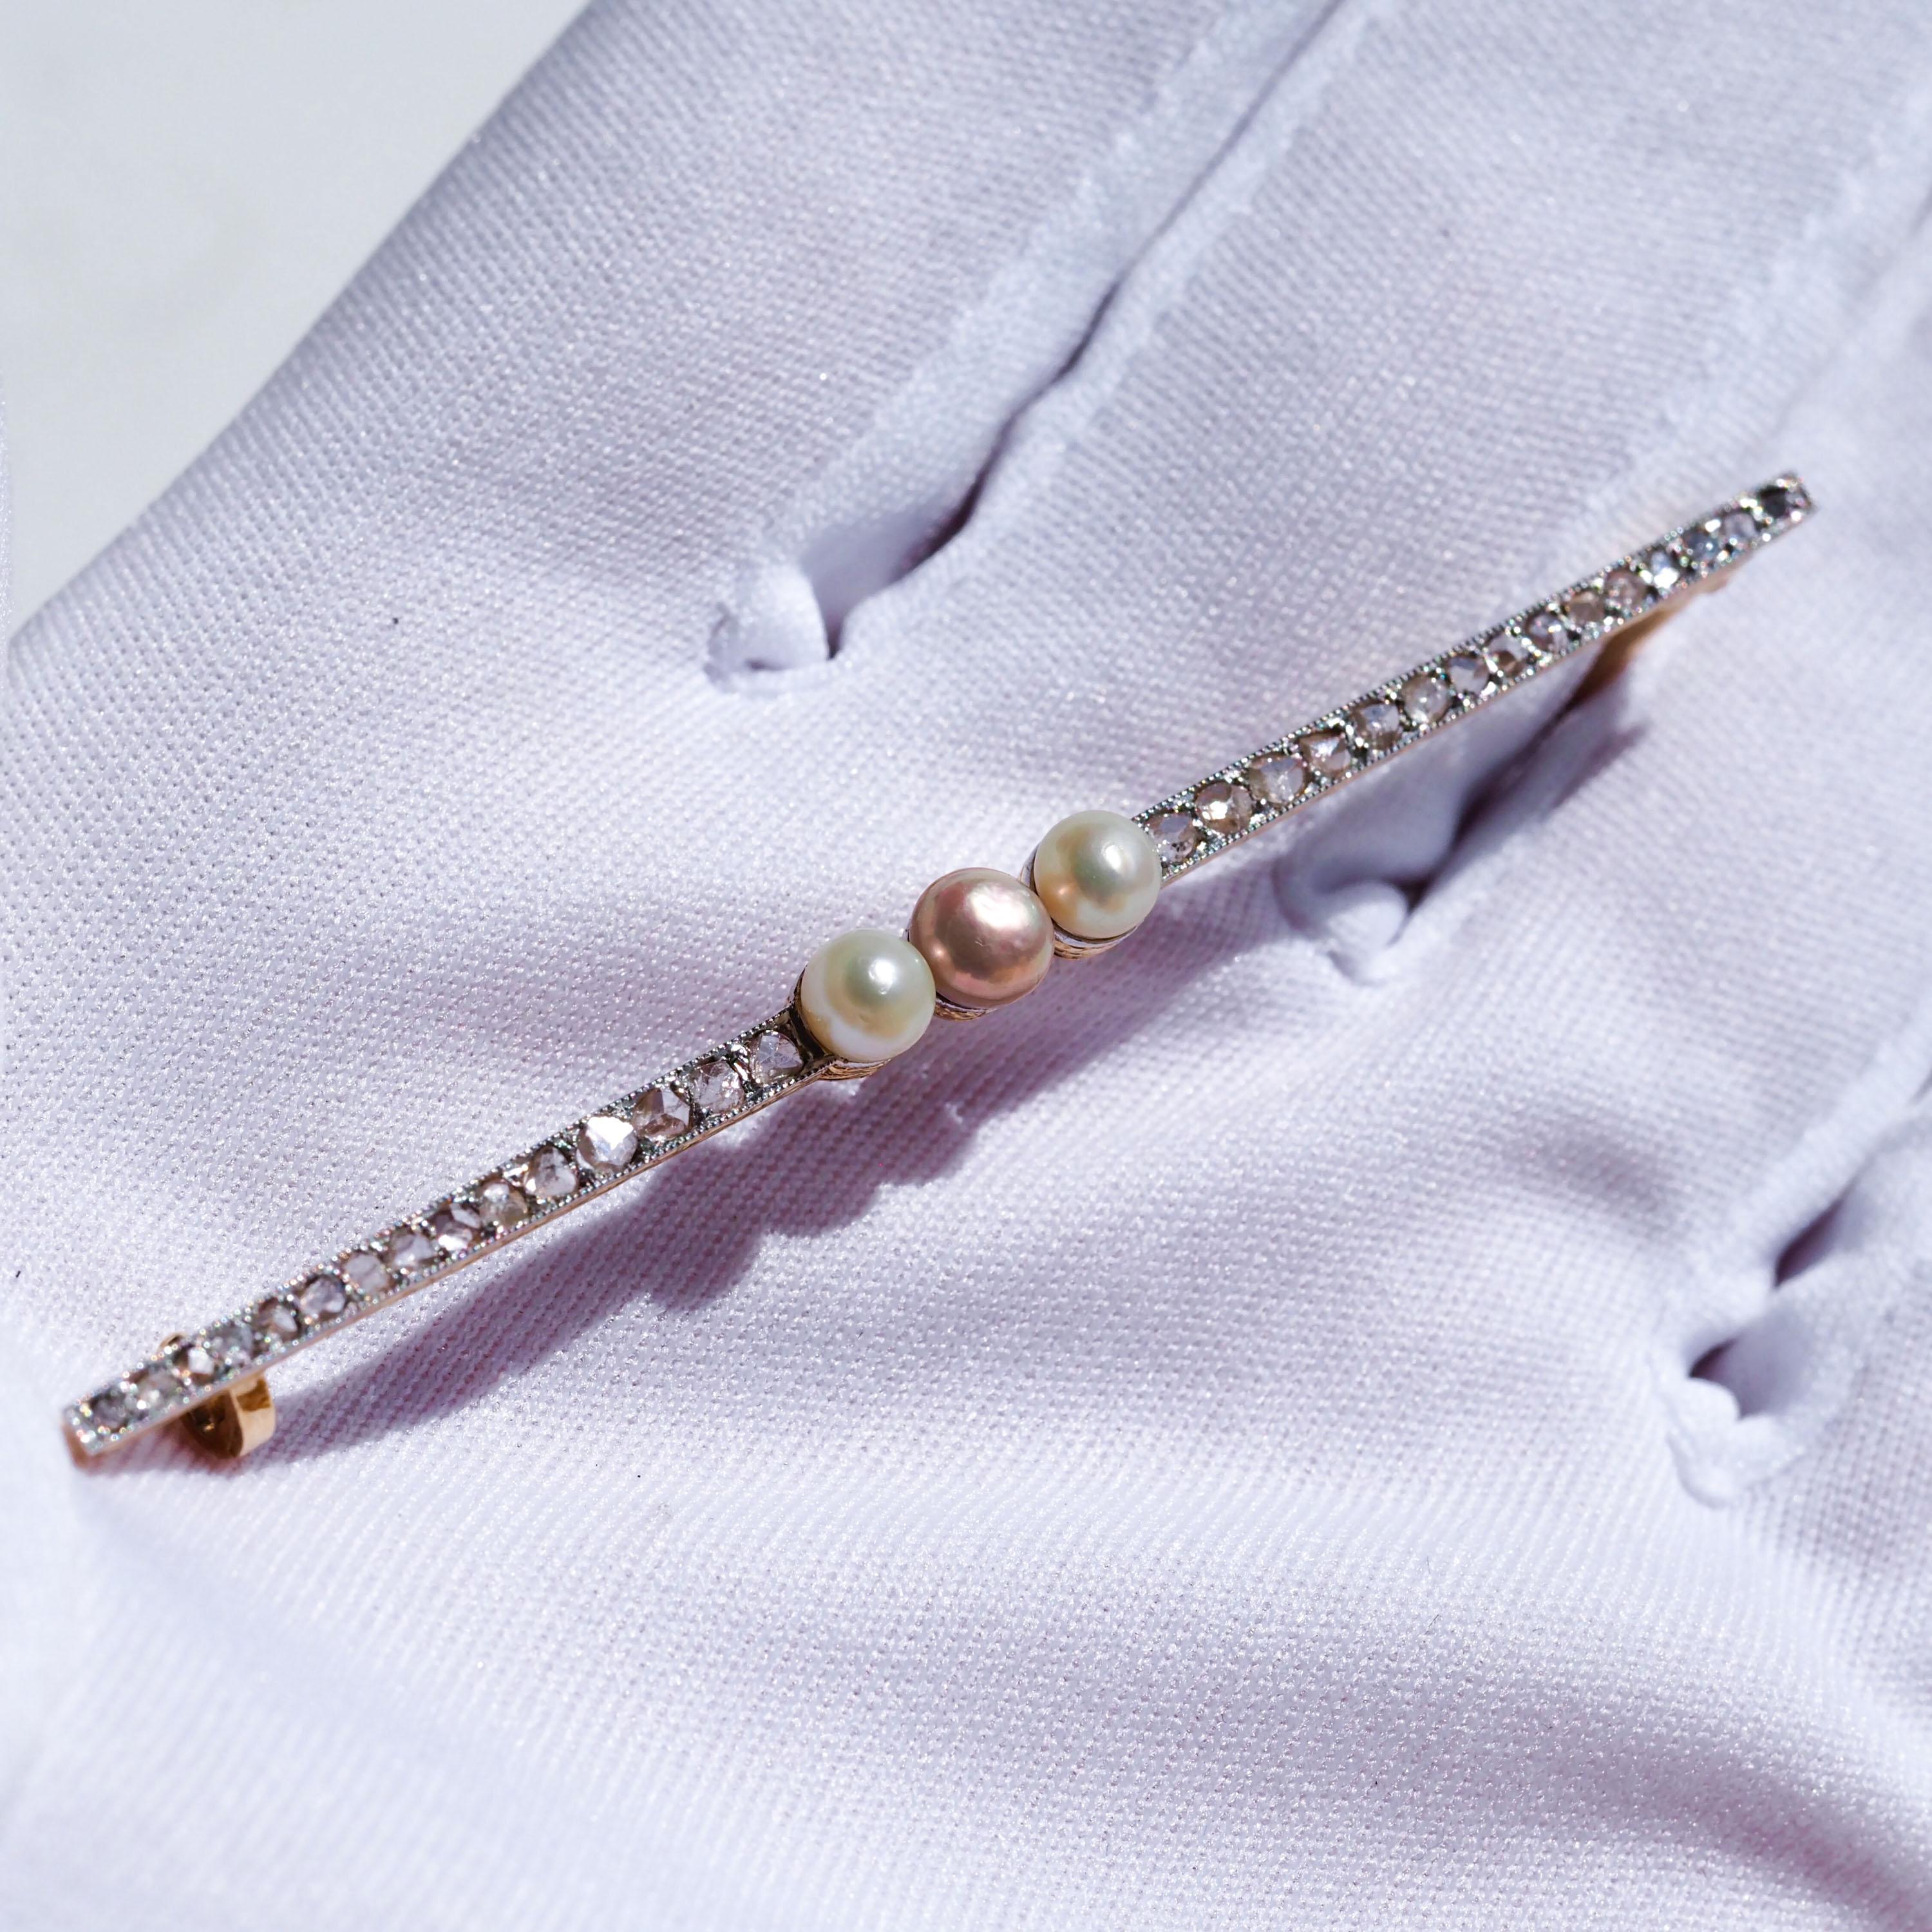 Antique 18ct Gold & Platinum Pink Pearl & Diamond Brooch - c.1920 For Sale 9